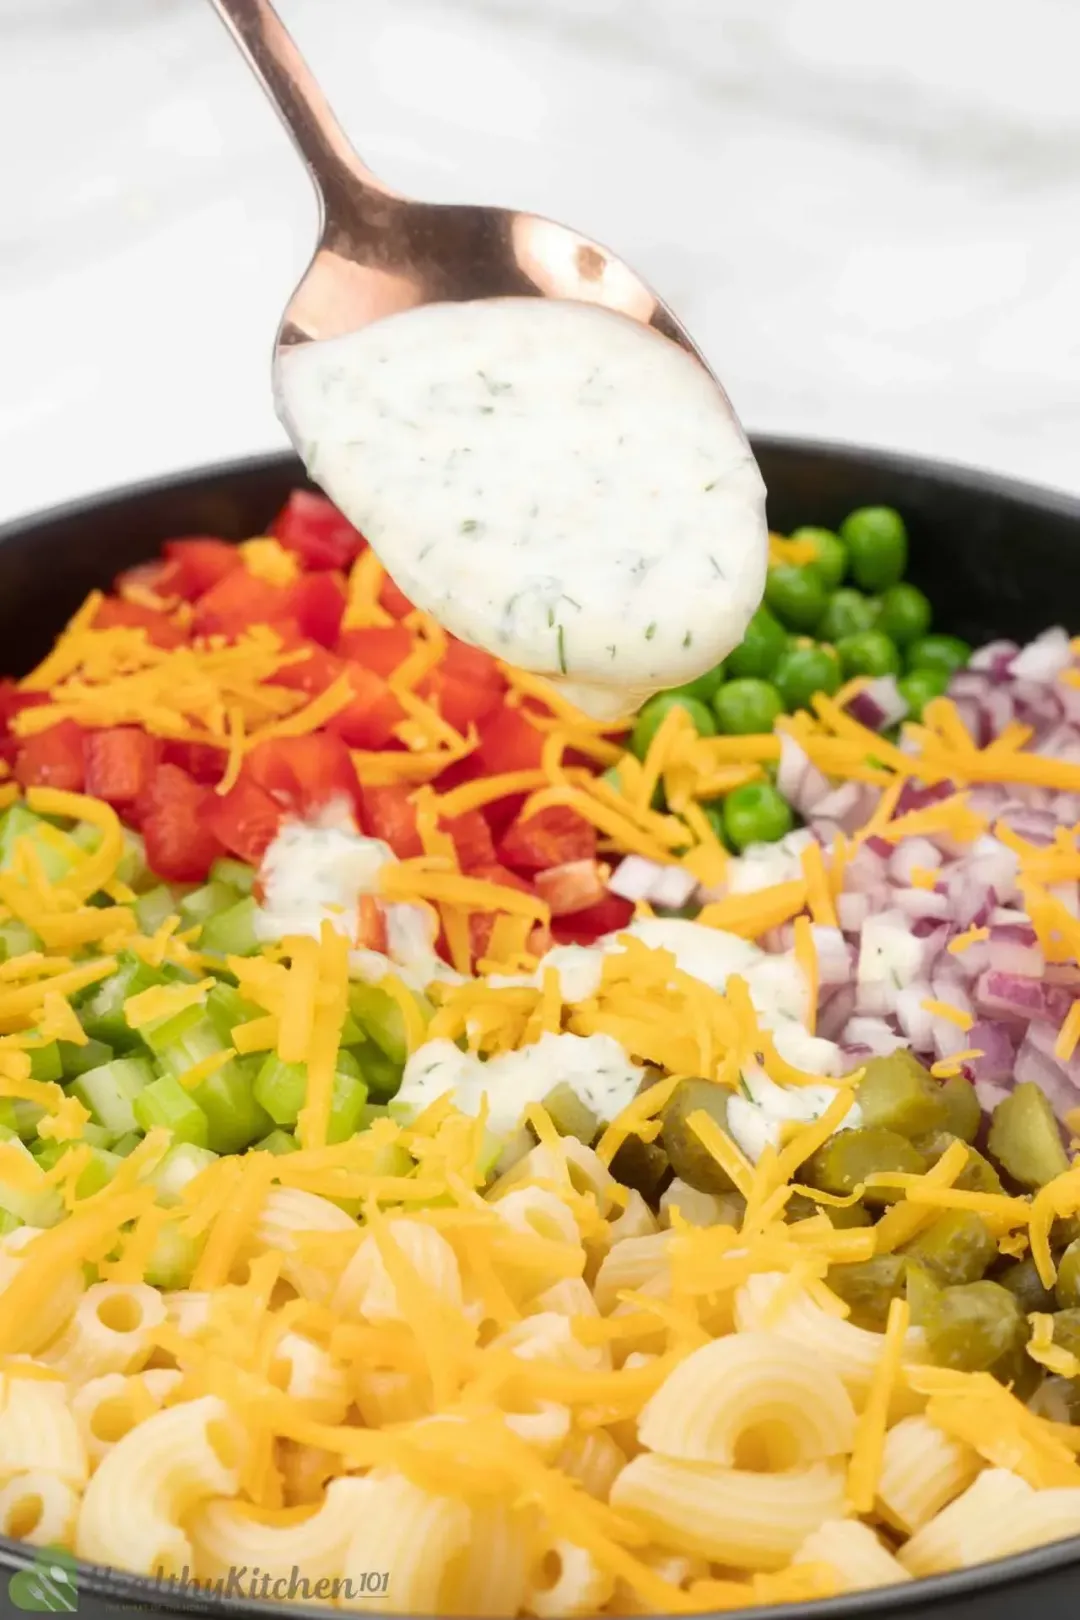 A bowl of macaroni salad with a creamy dressing, diced vegetables, and herbs on top.